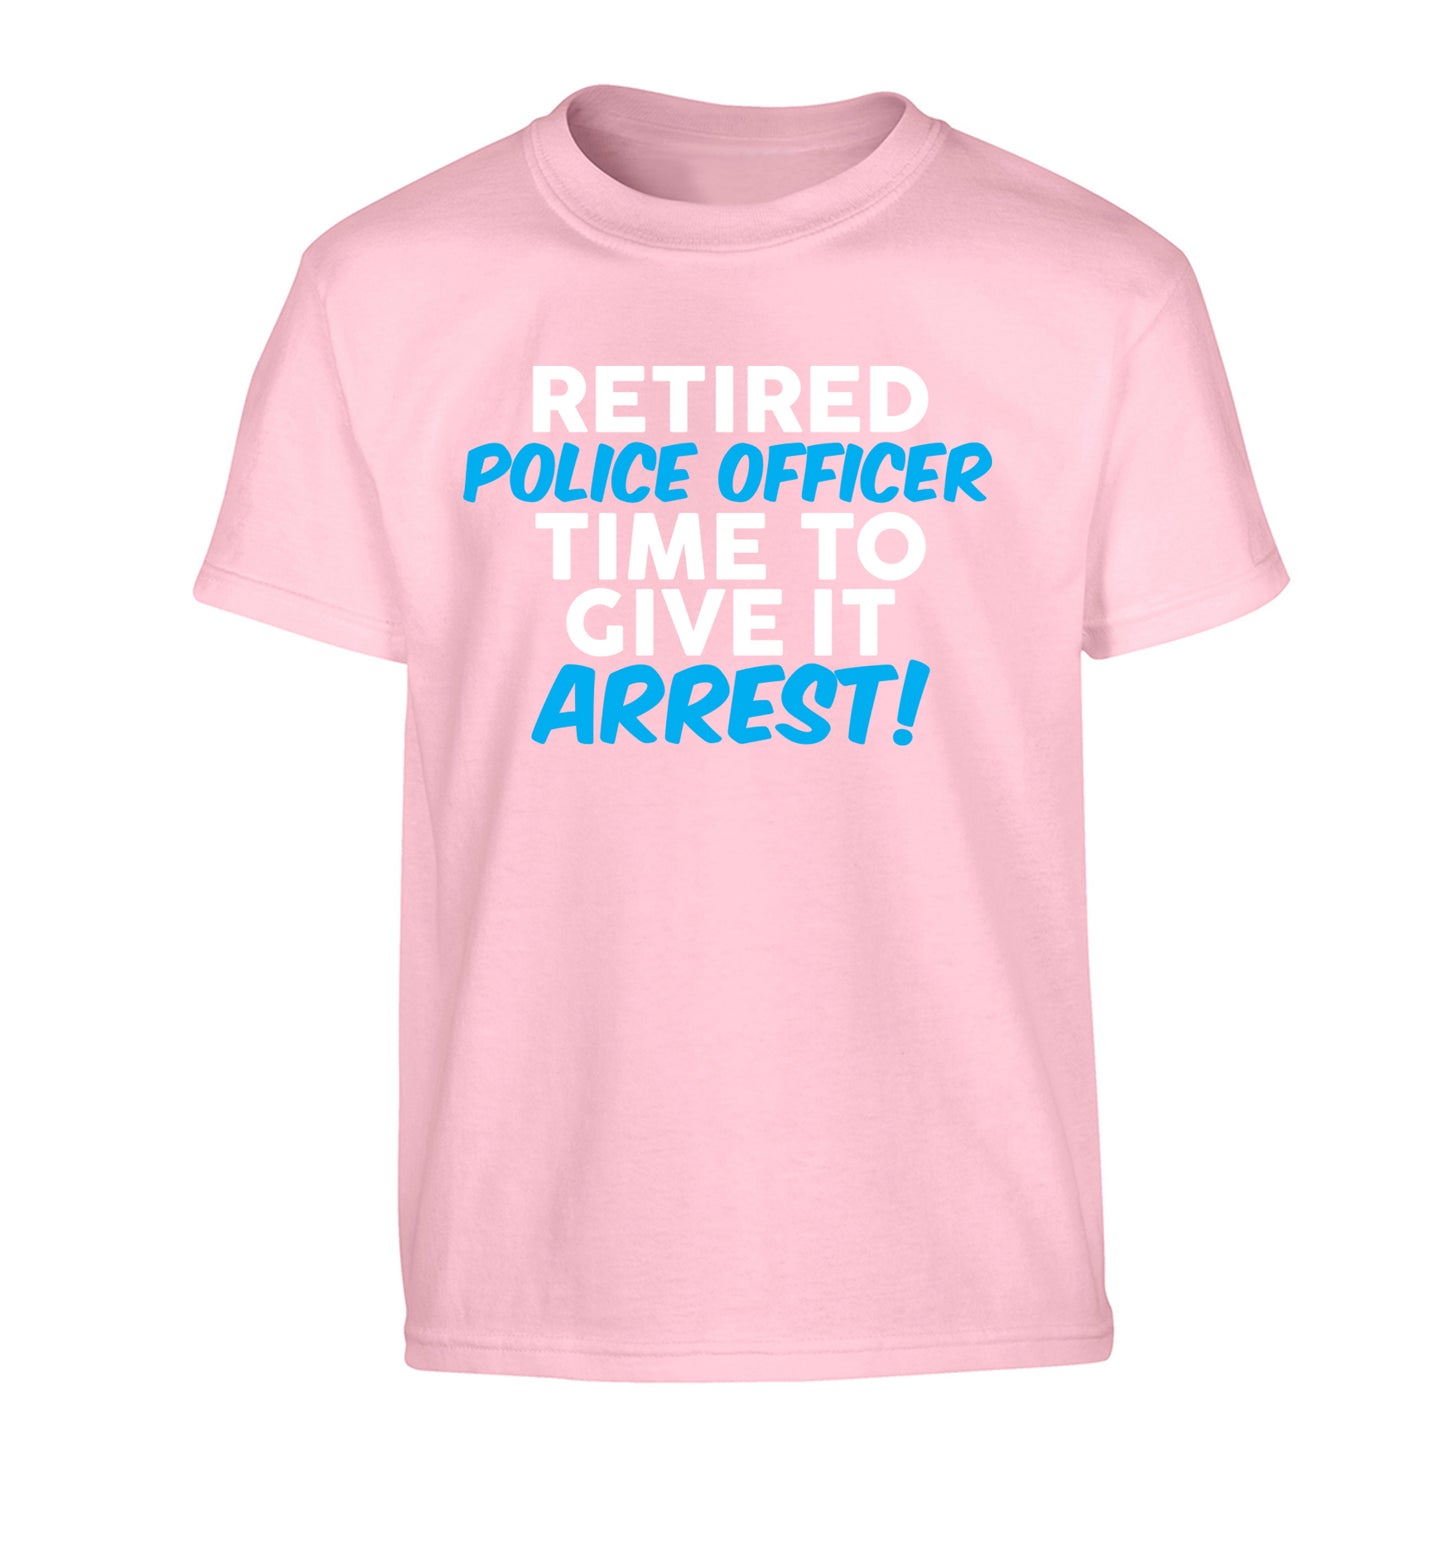 Retired police officer time to give it arrest Children's light pink Tshirt 12-13 Years